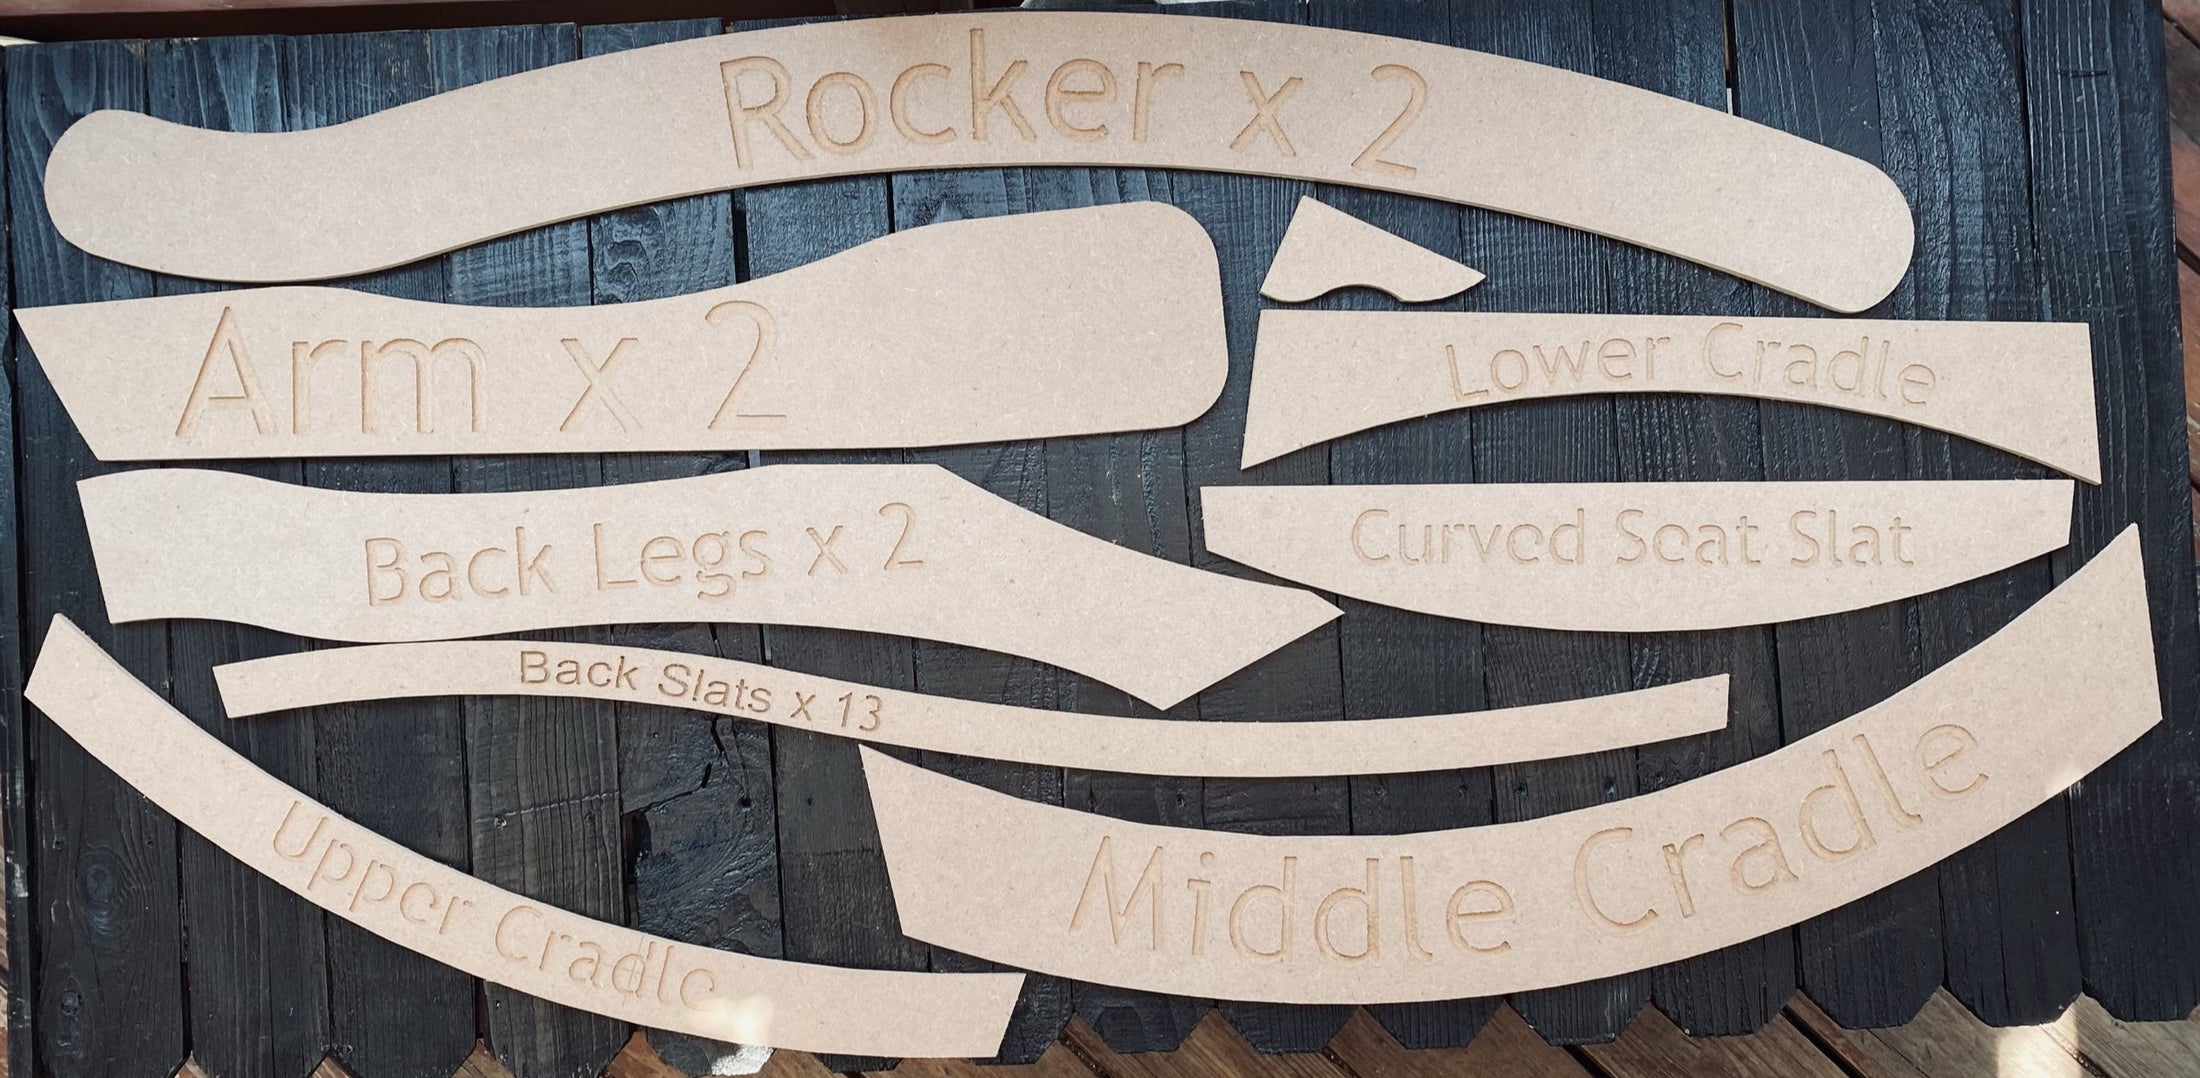 Link to go buy the Wooden Templates for the Adirondack Chair and the Rocking Chair